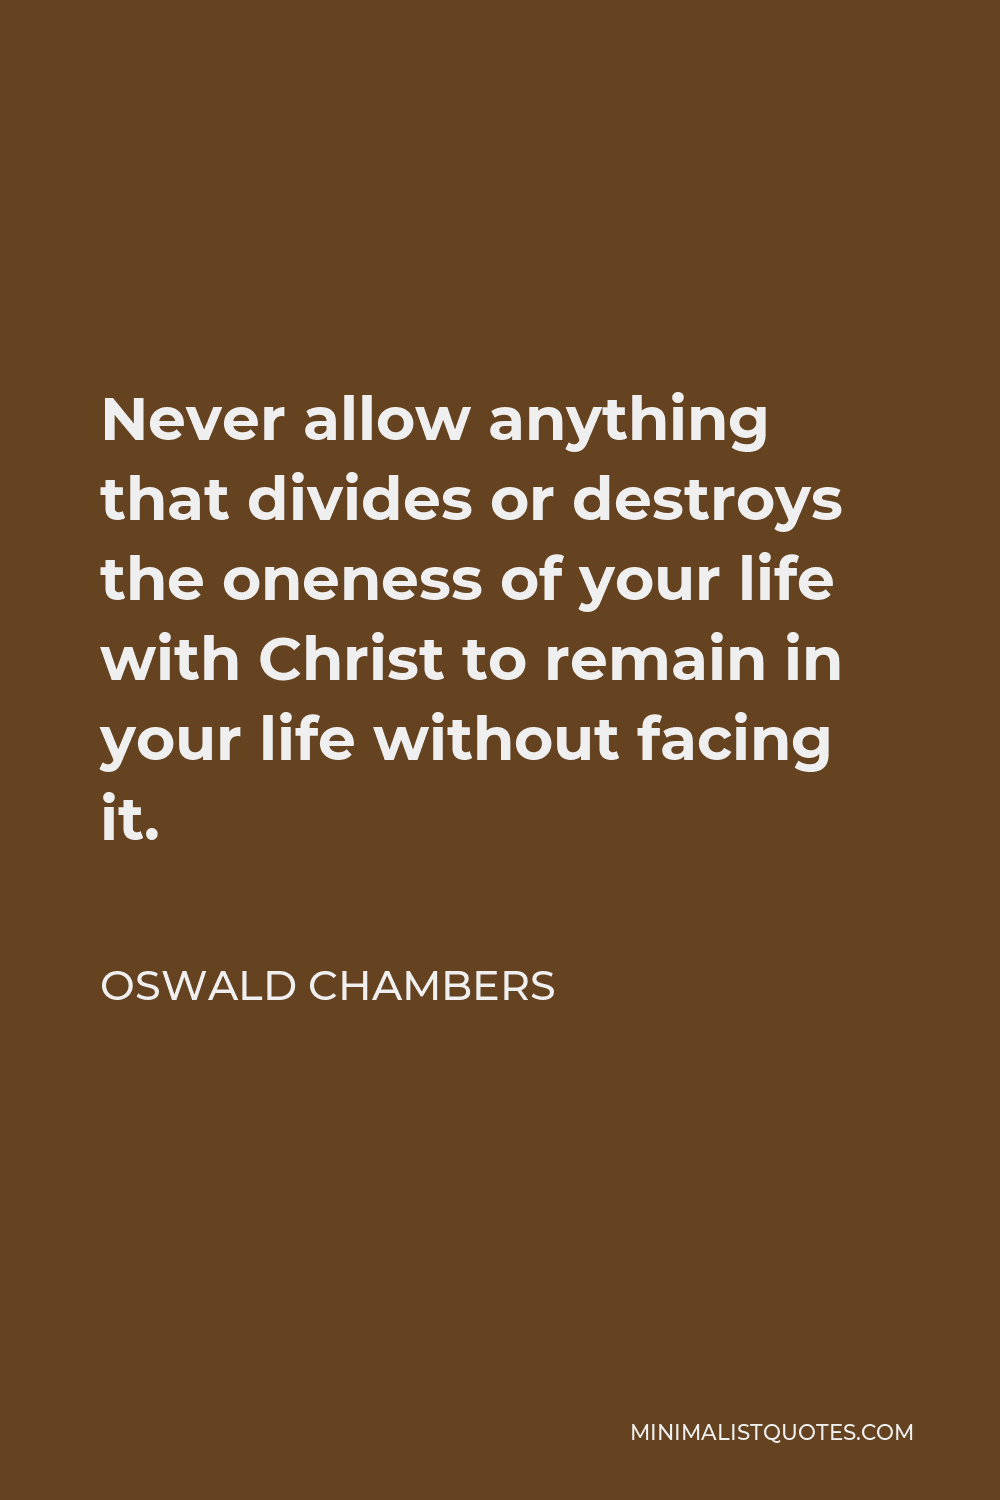 Oswald Chambers Quote - Never allow anything that divides or destroys the oneness of your life with Christ to remain in your life without facing it.